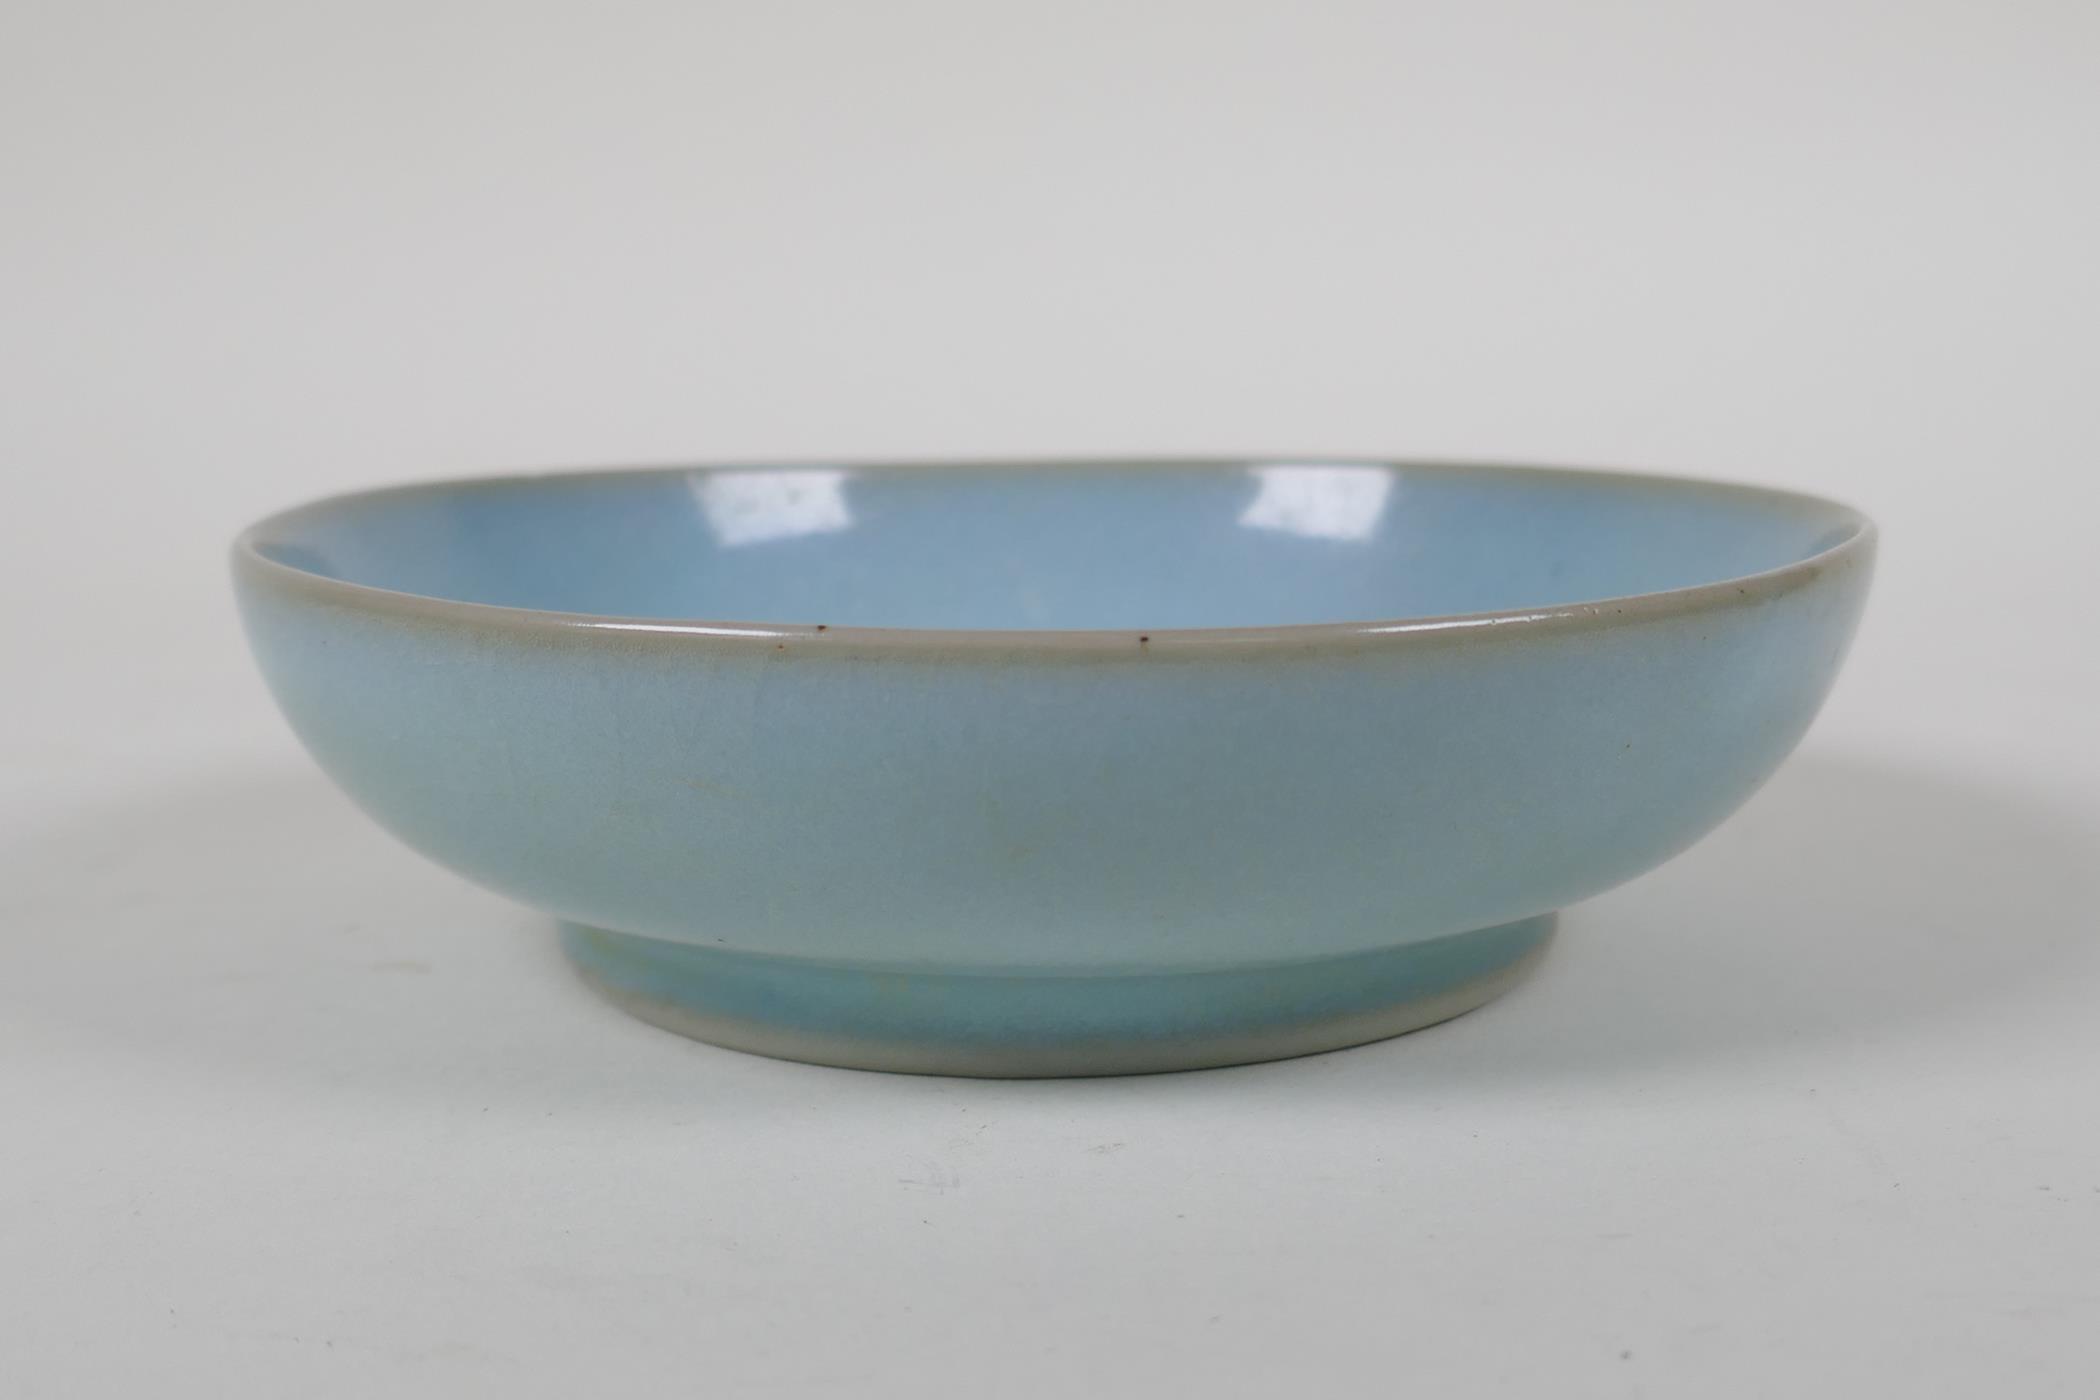 A Chinese Ru ware style porcelain dish, 5½" diameter